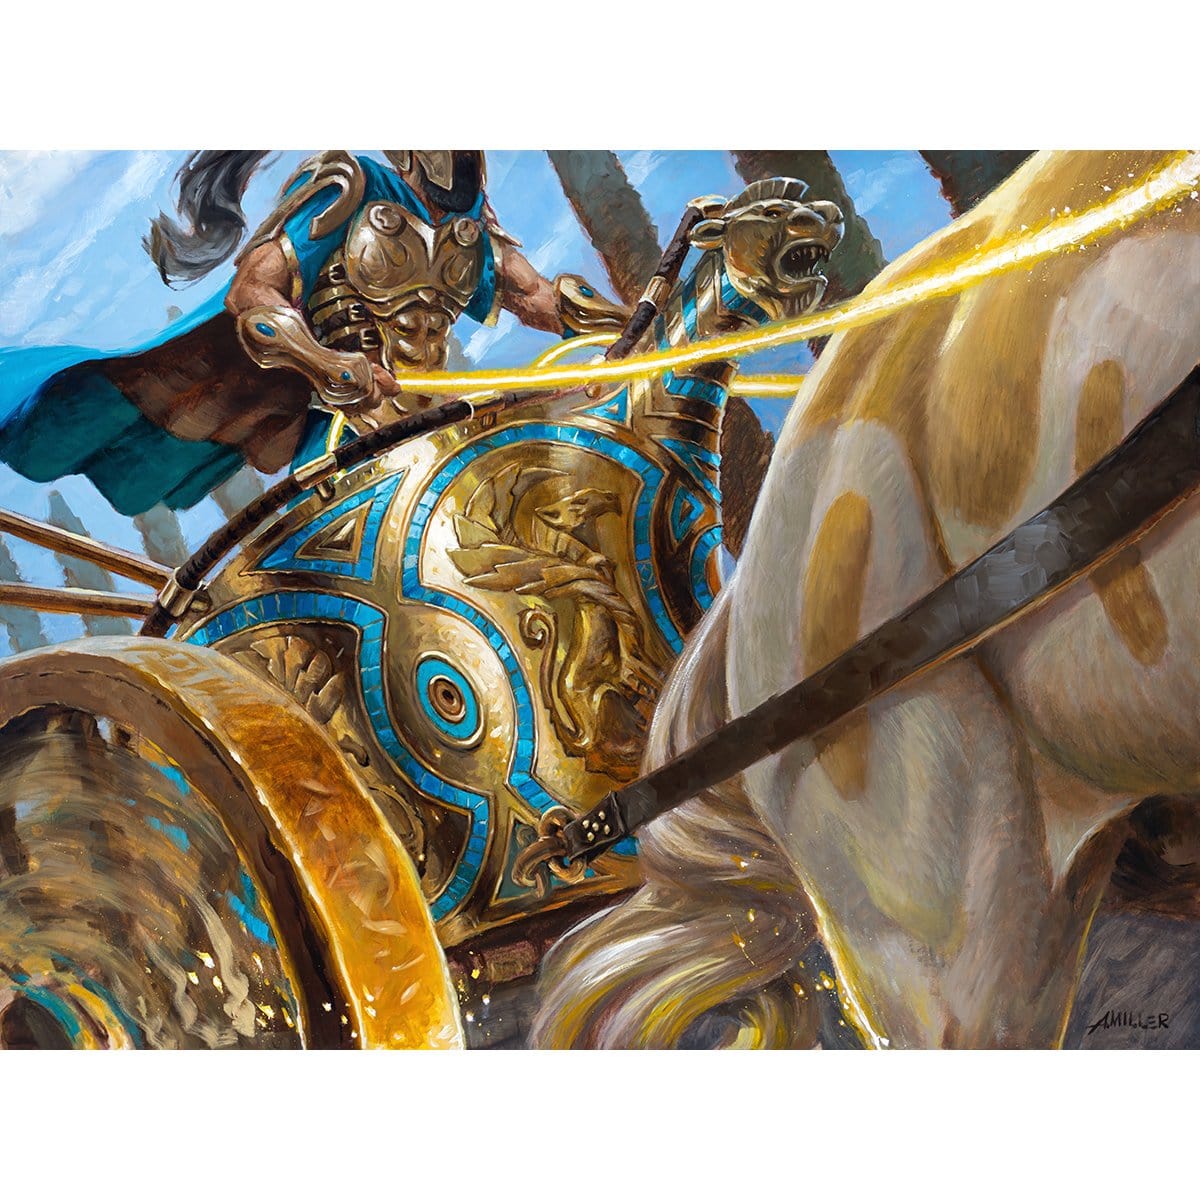 Thundering Chariot Print - Print - Original Magic Art - Accessories for Magic the Gathering and other card games